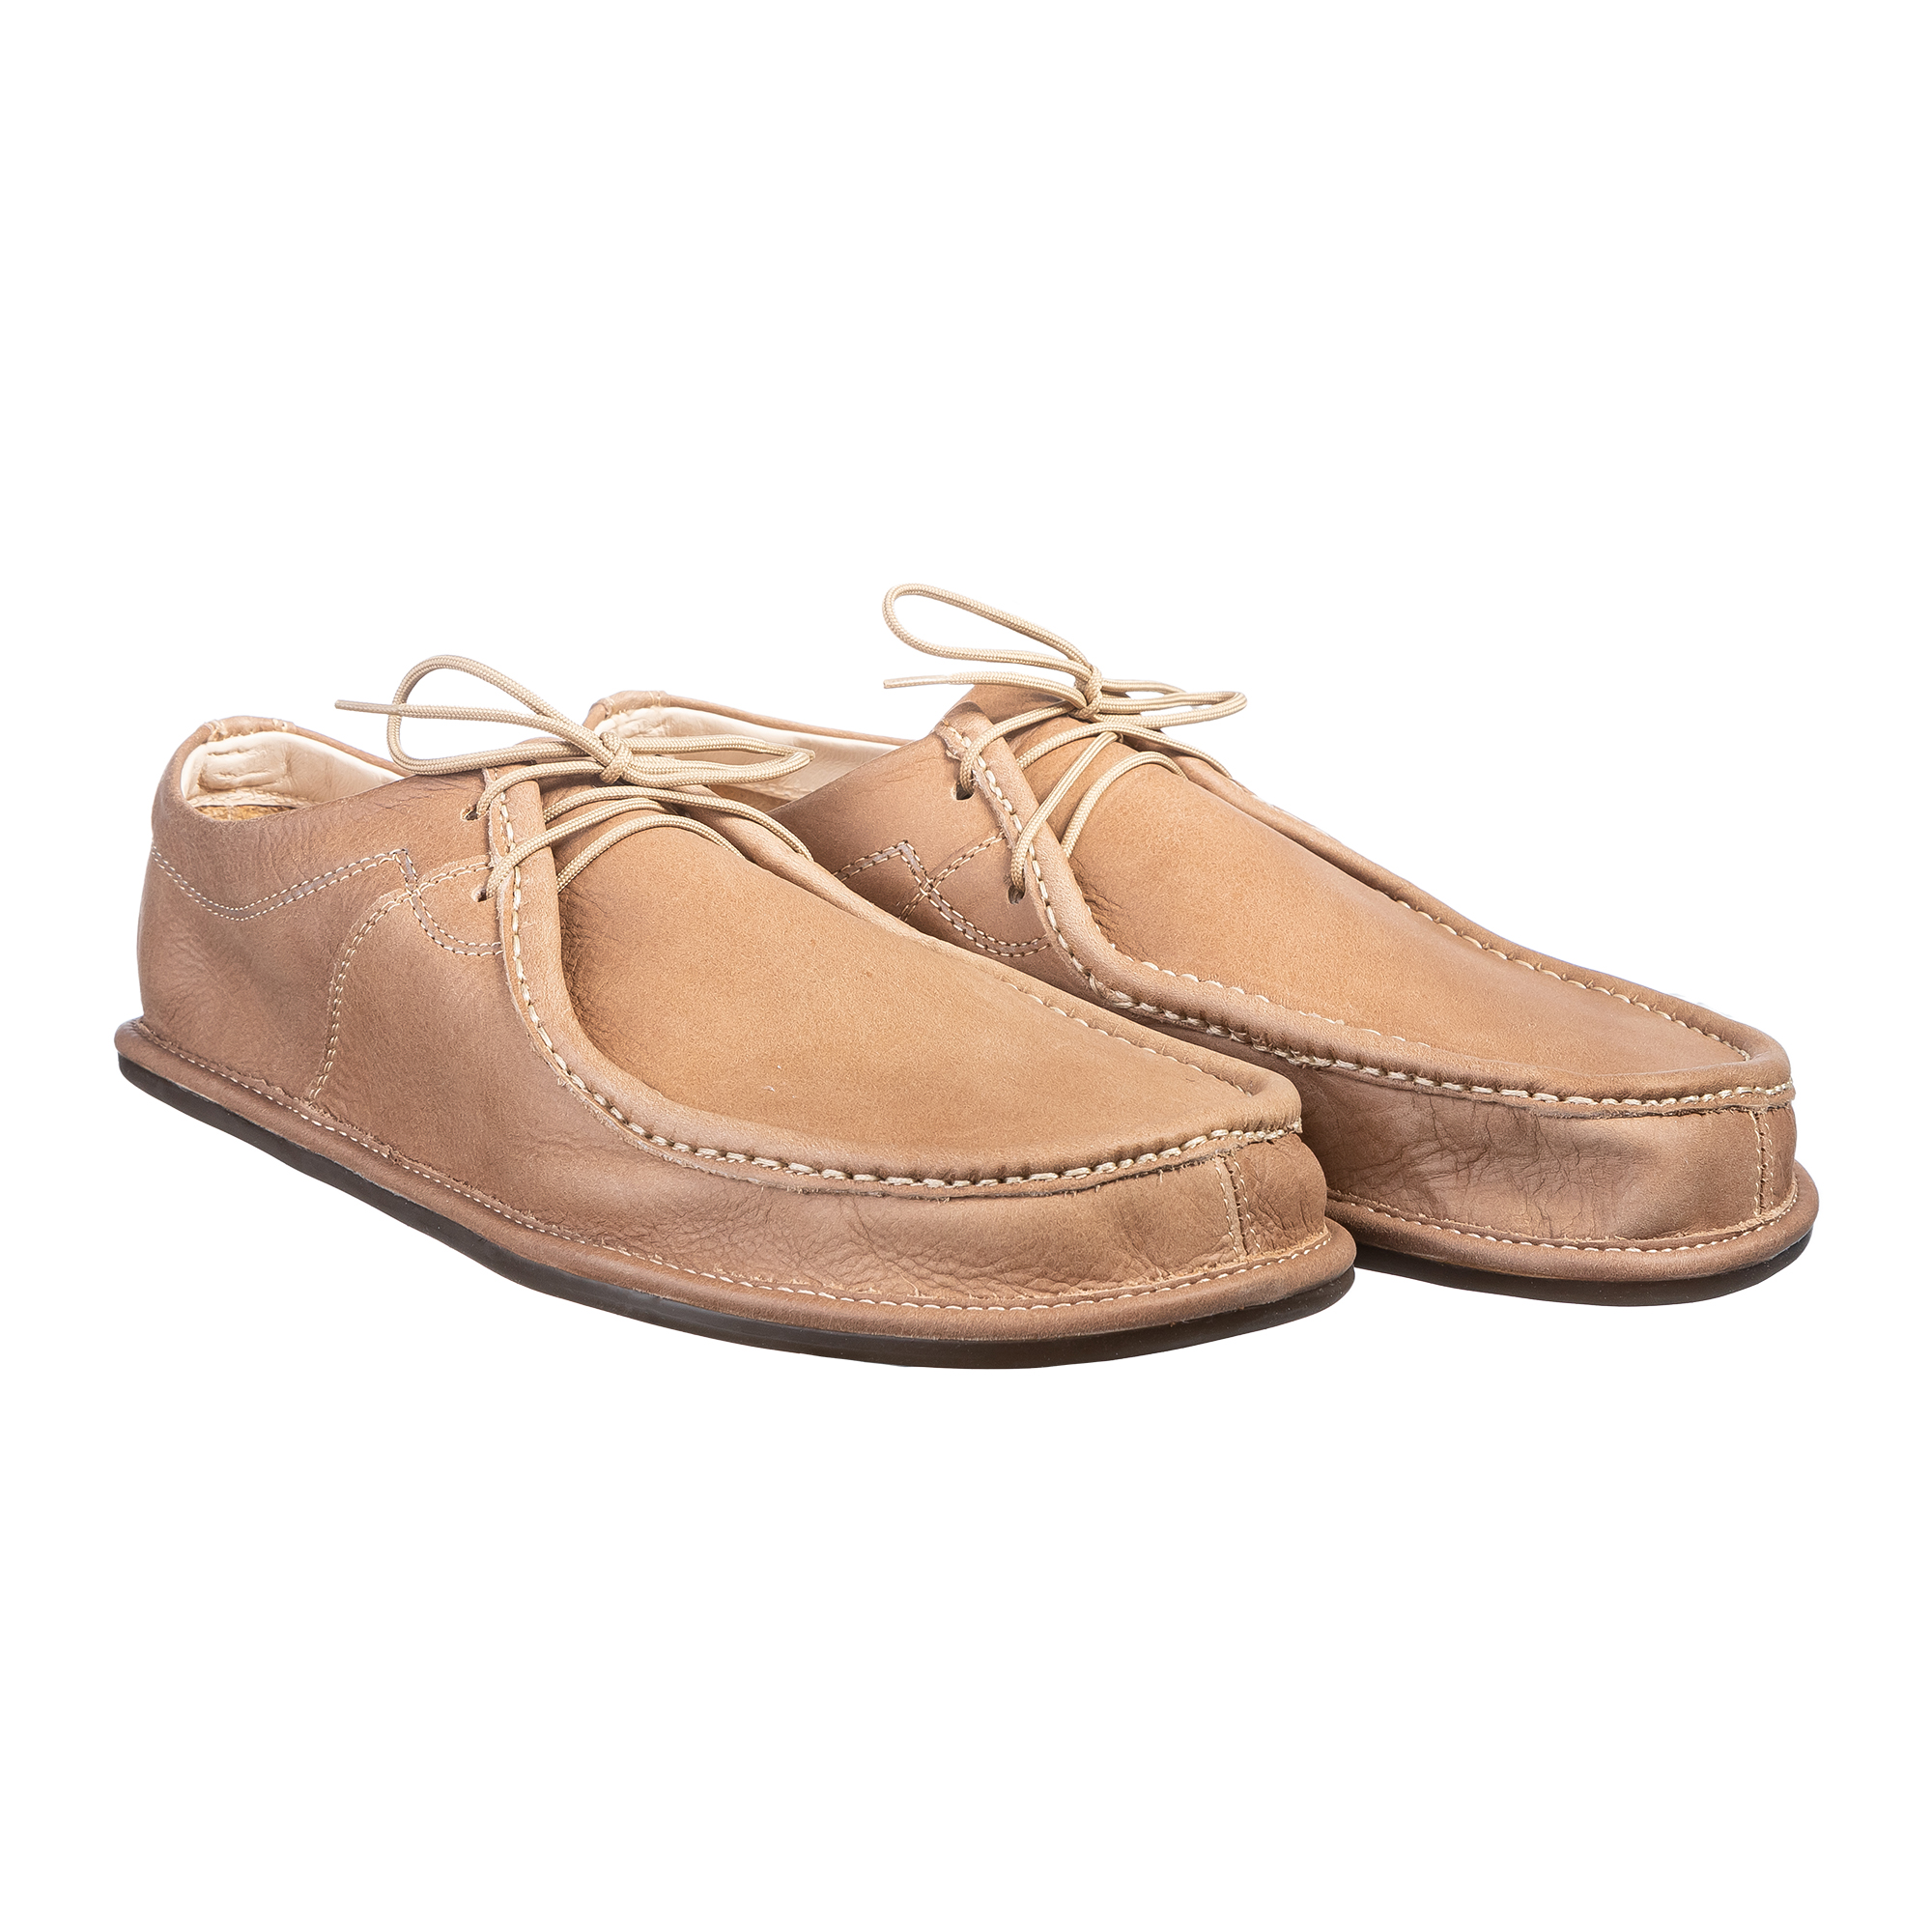 Men's barefoot shoes for work - Magical CAMERON